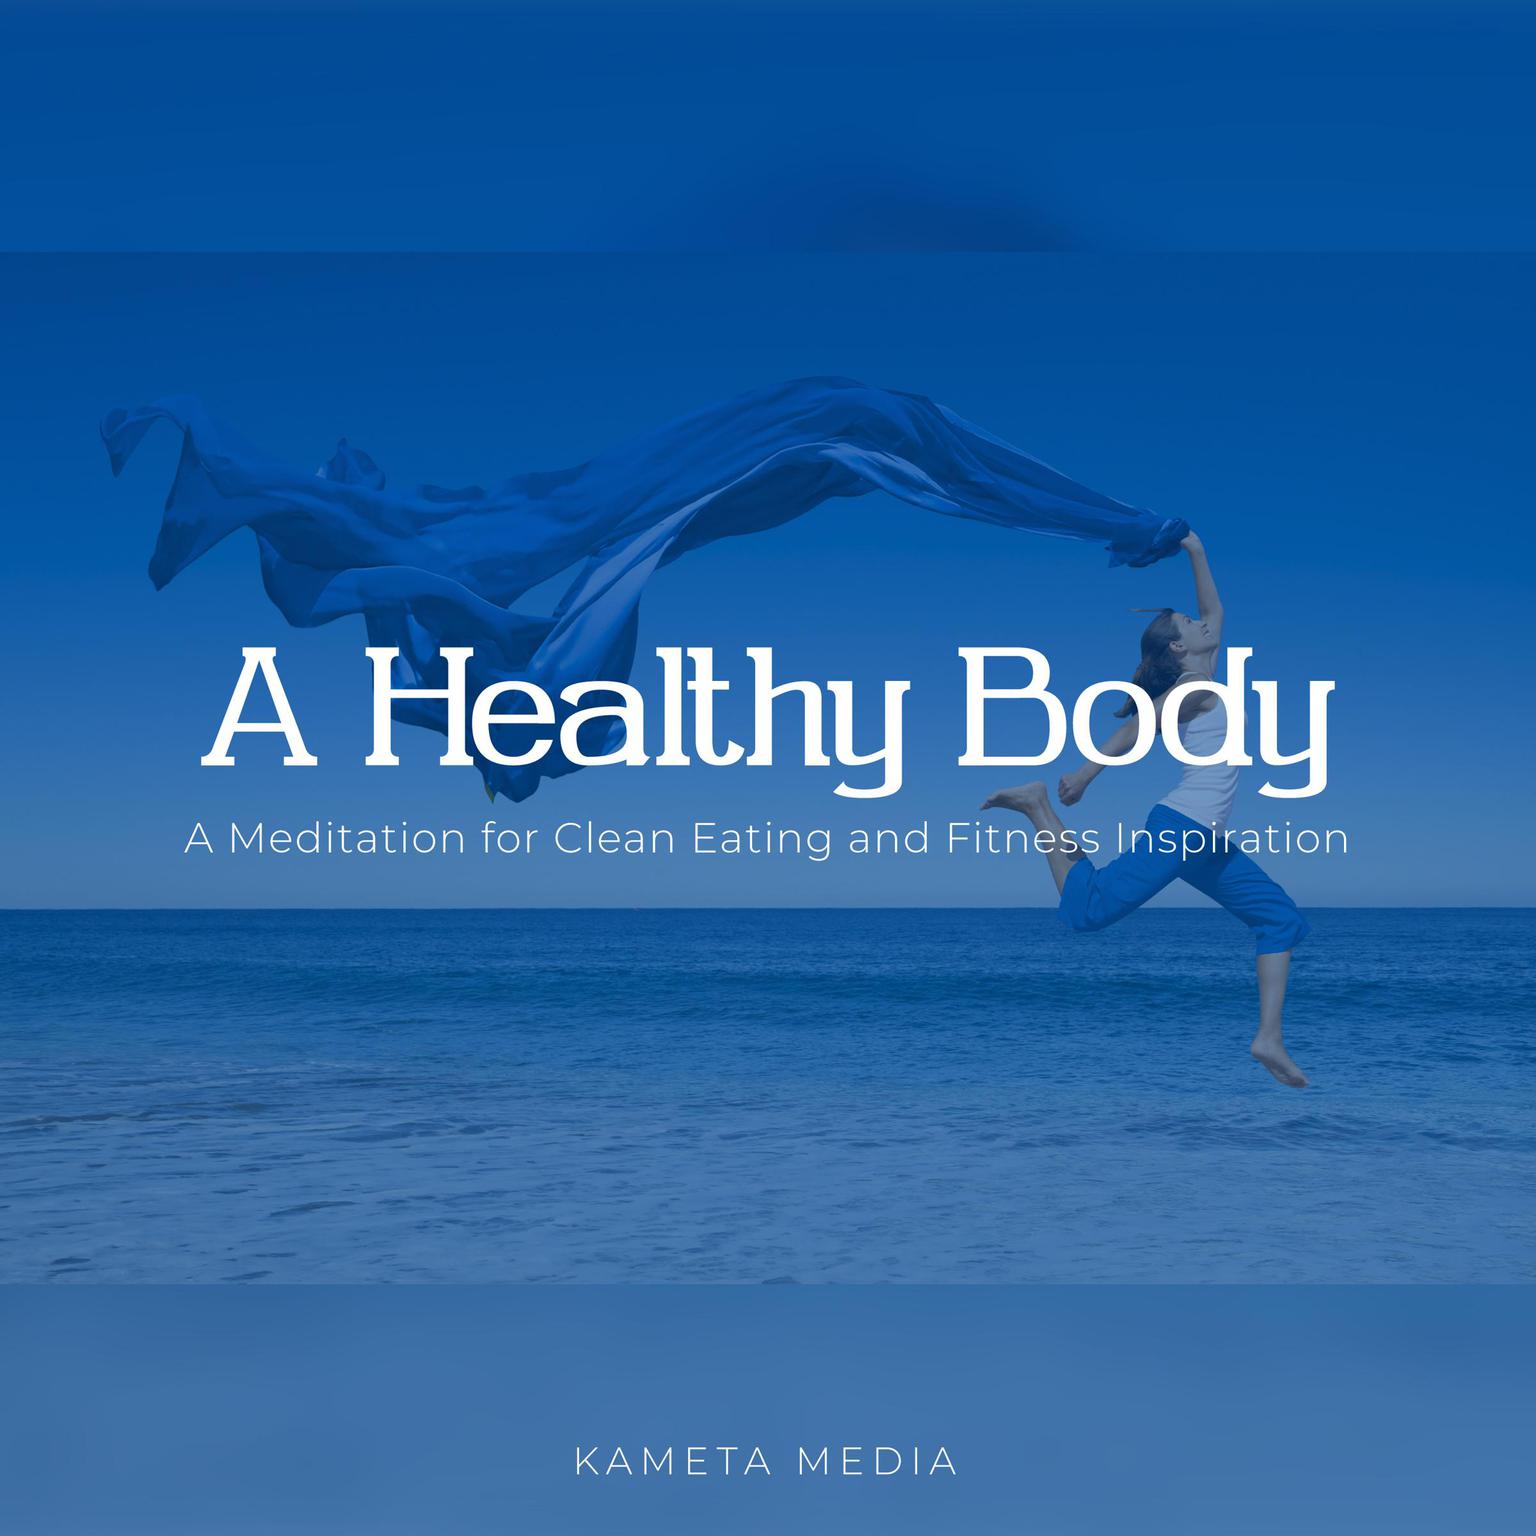 A Healthy Body: A Meditation for Clean Eating and Fitness Inspiration Audiobook, by Kameta Media